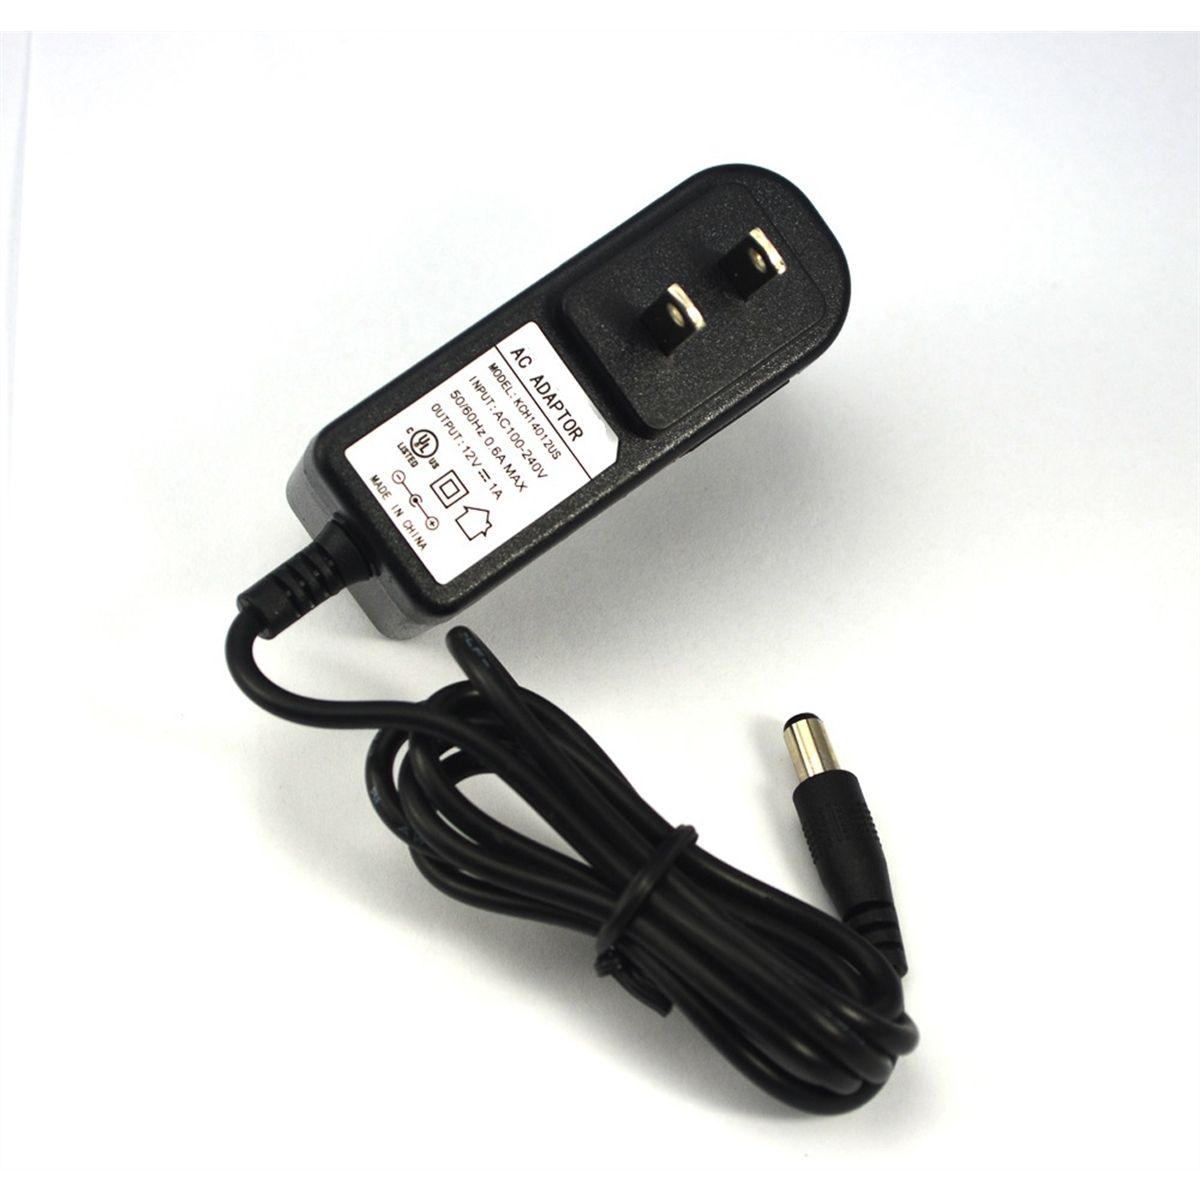 100-240 Volt Wall Charger For PPJS2976DLX